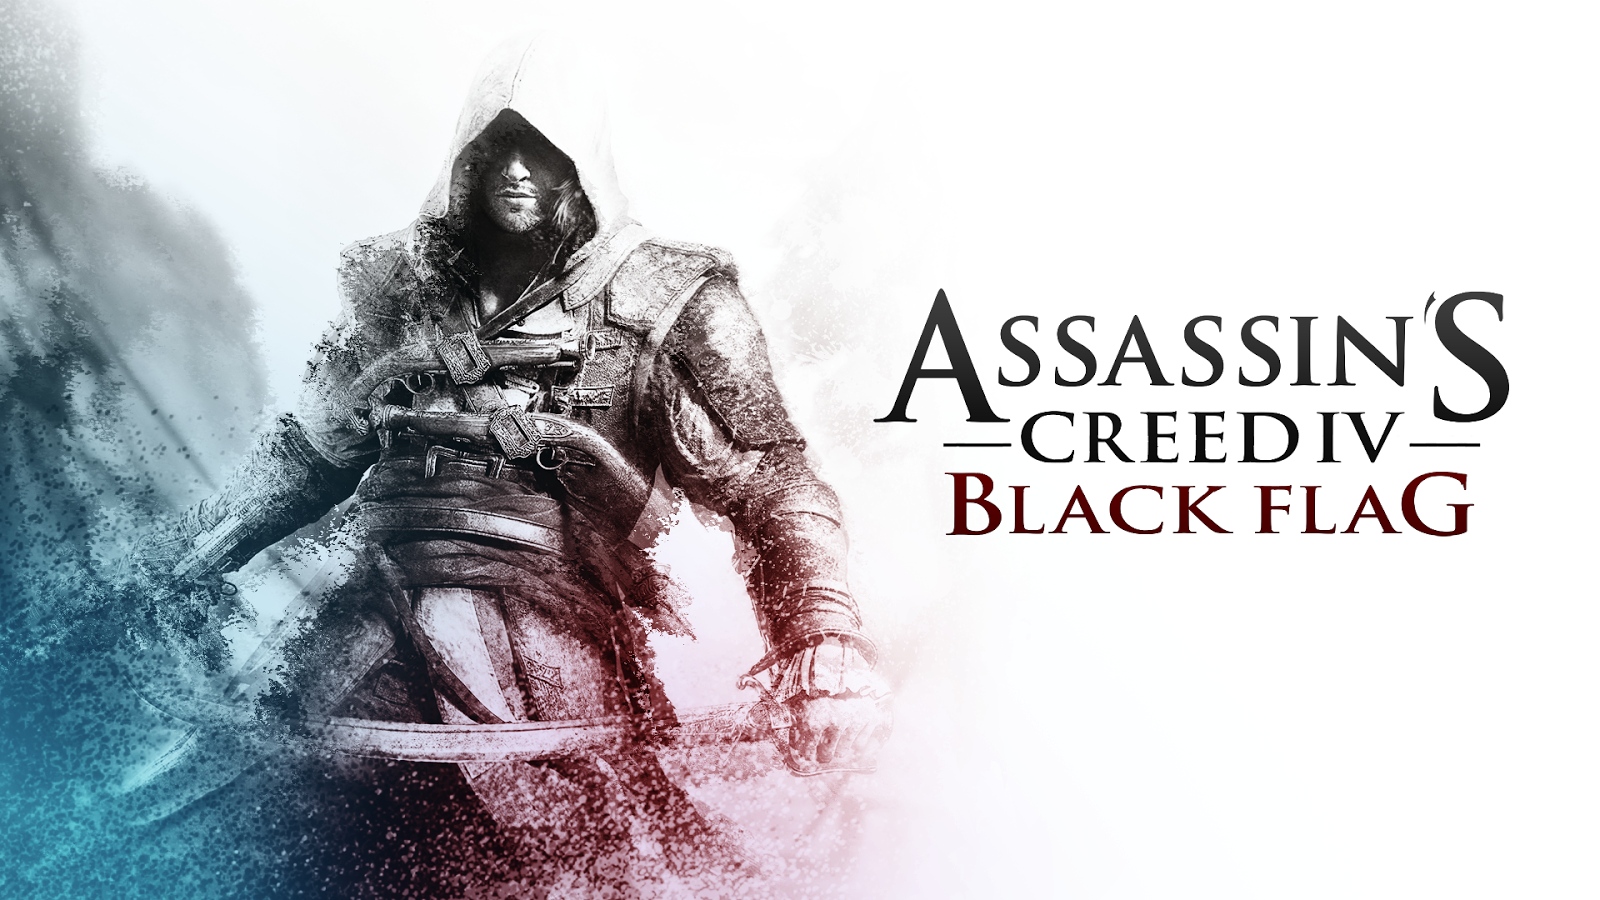 Assassin's Creed IV Black Flag PS4 Wallpapers